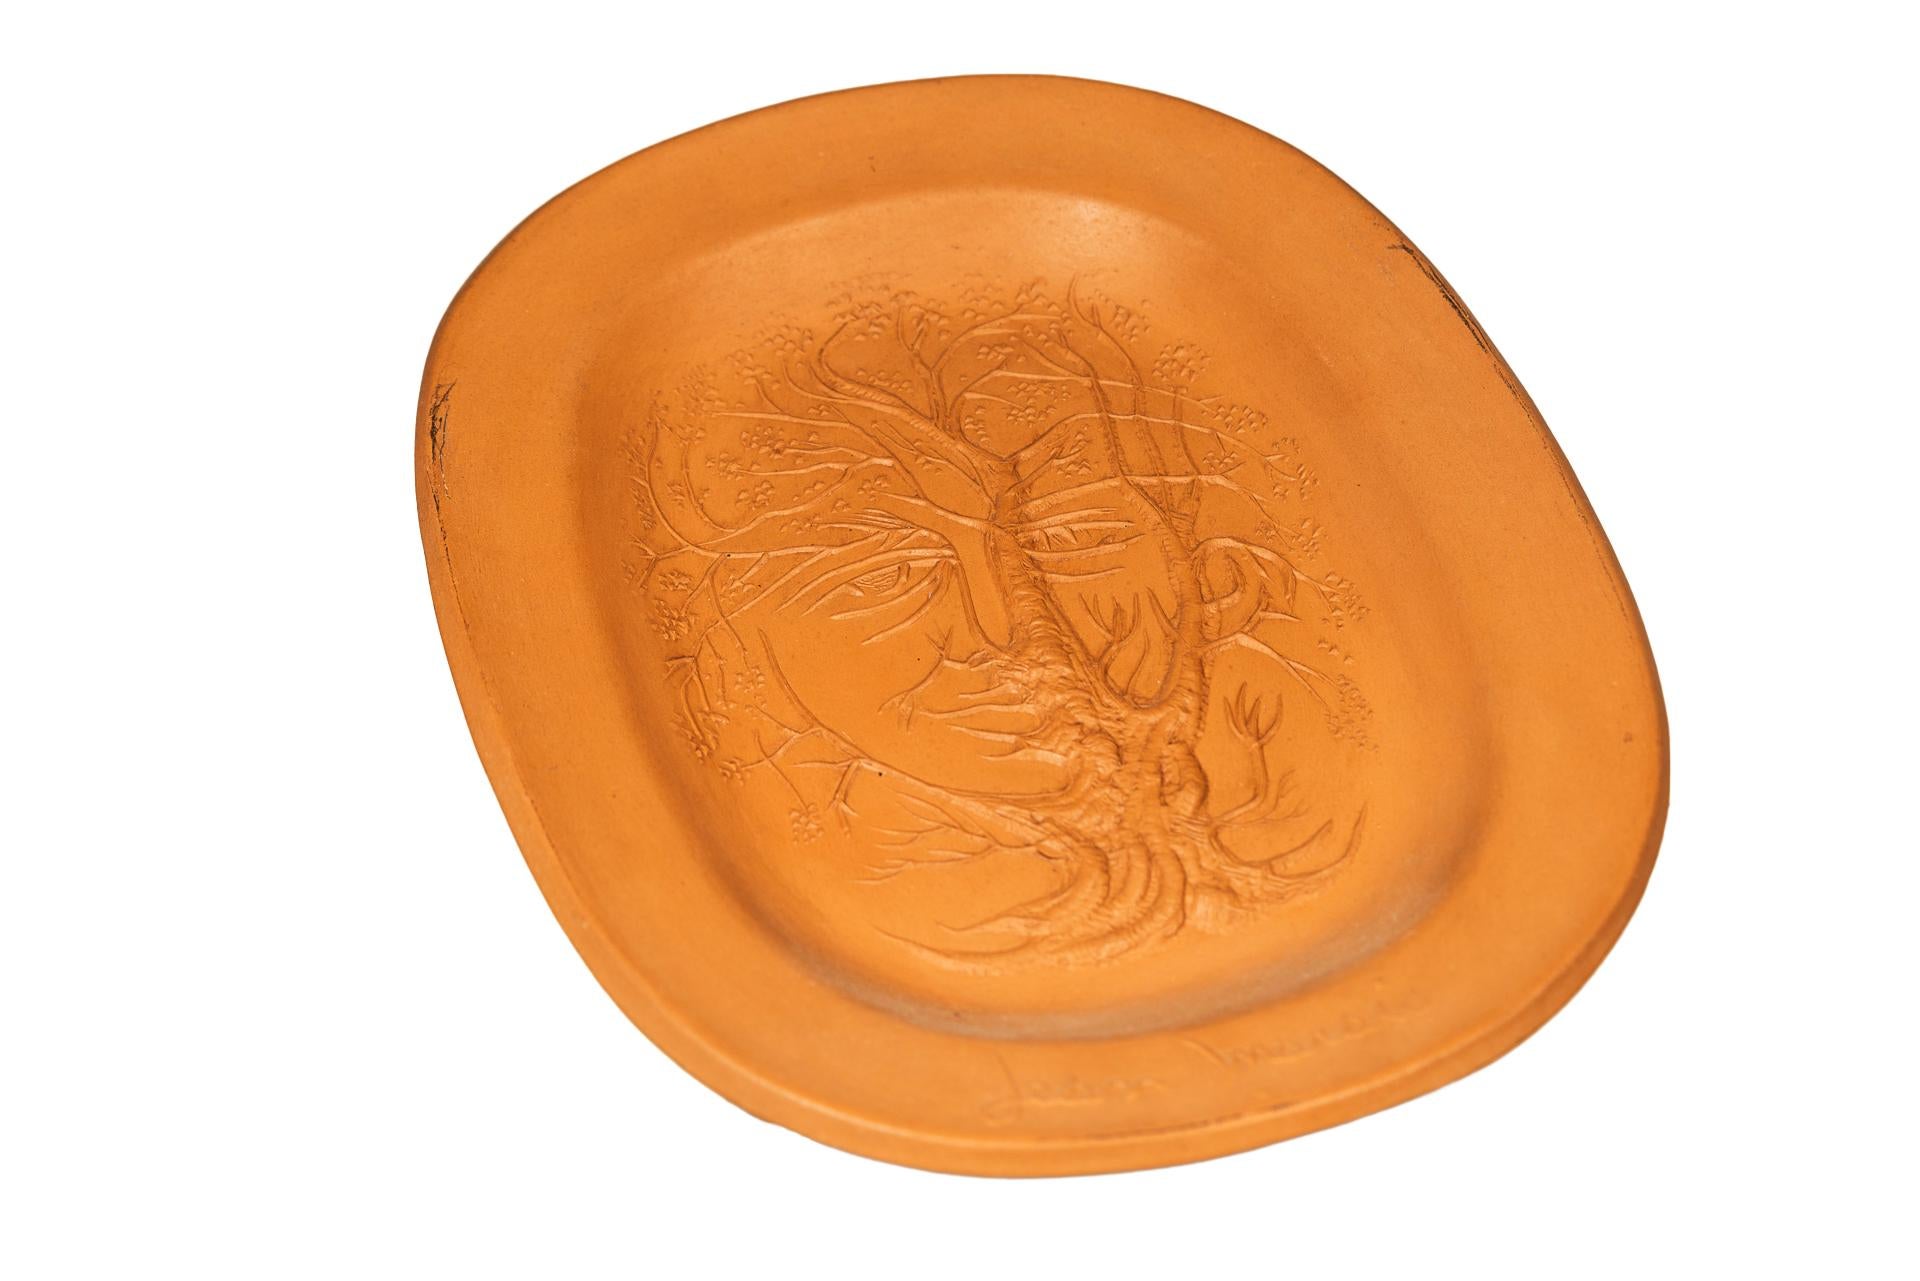 Jean Marais (1913-1998),
Oval earthenware plate,
Incised bottom decorated with faun head,
Signed,
France, circa 1970.

Measures: Height 33 cm, width 26 cm, depth 3 cm.